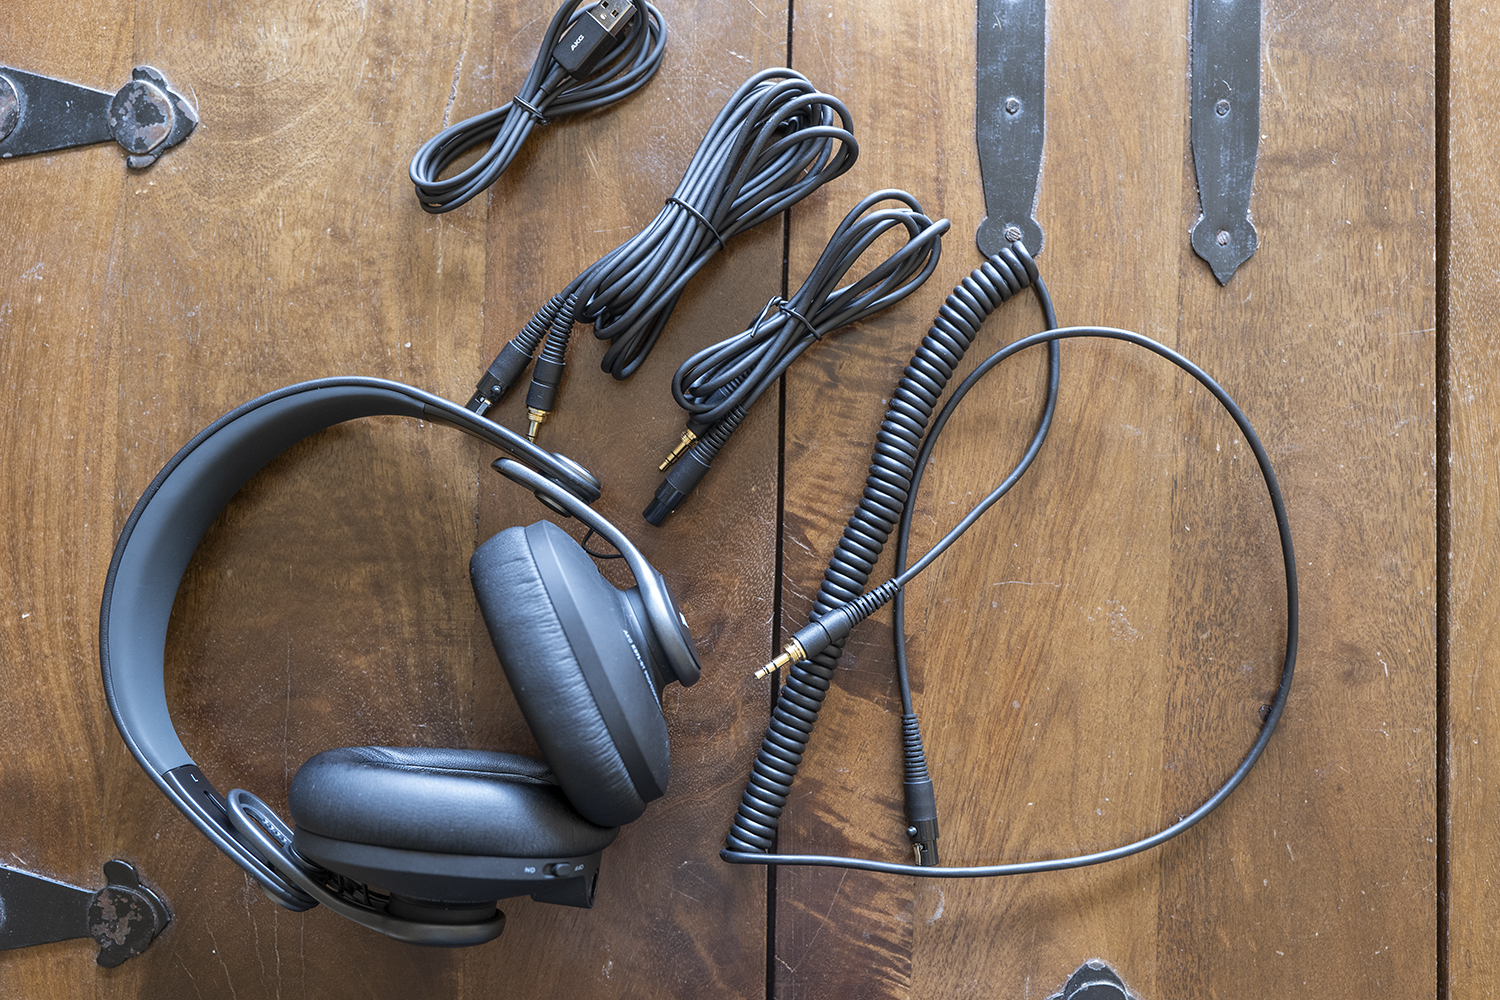 AKG K371 review: powerful, punchy and well put-together wired headphones